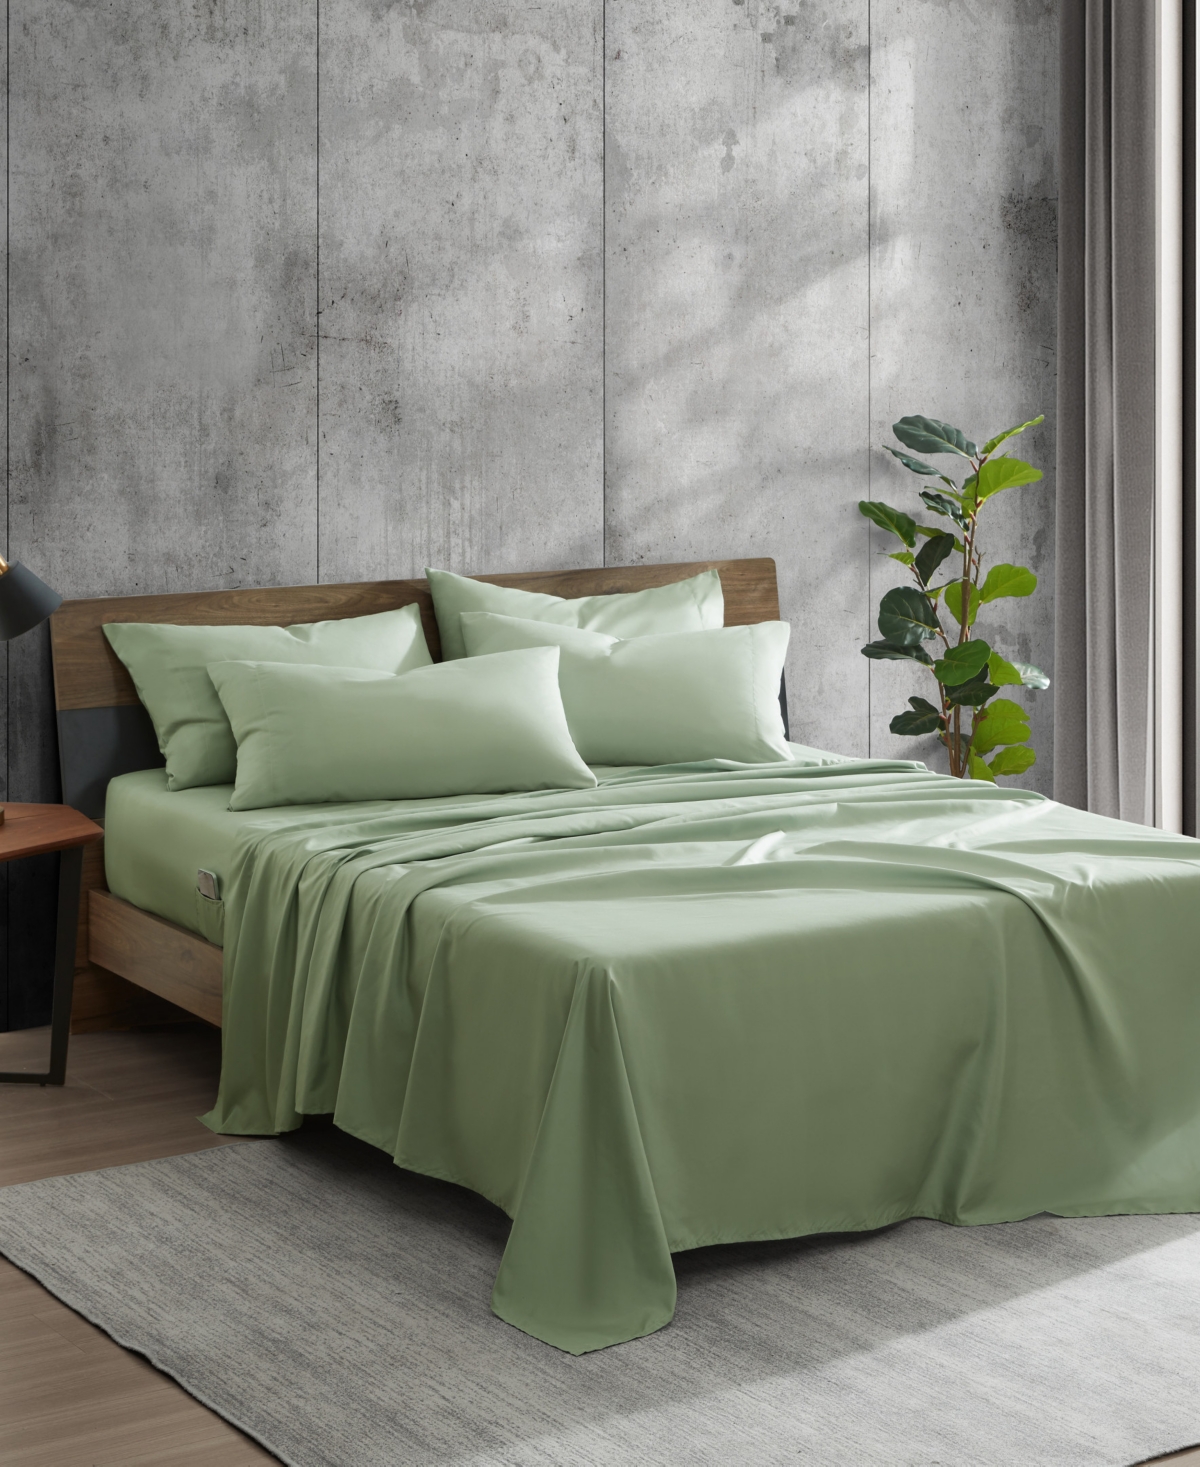 Kenneth Cole New York Solution Solid Microfiber 6 Piece Sheet Set, Full In Sage Green